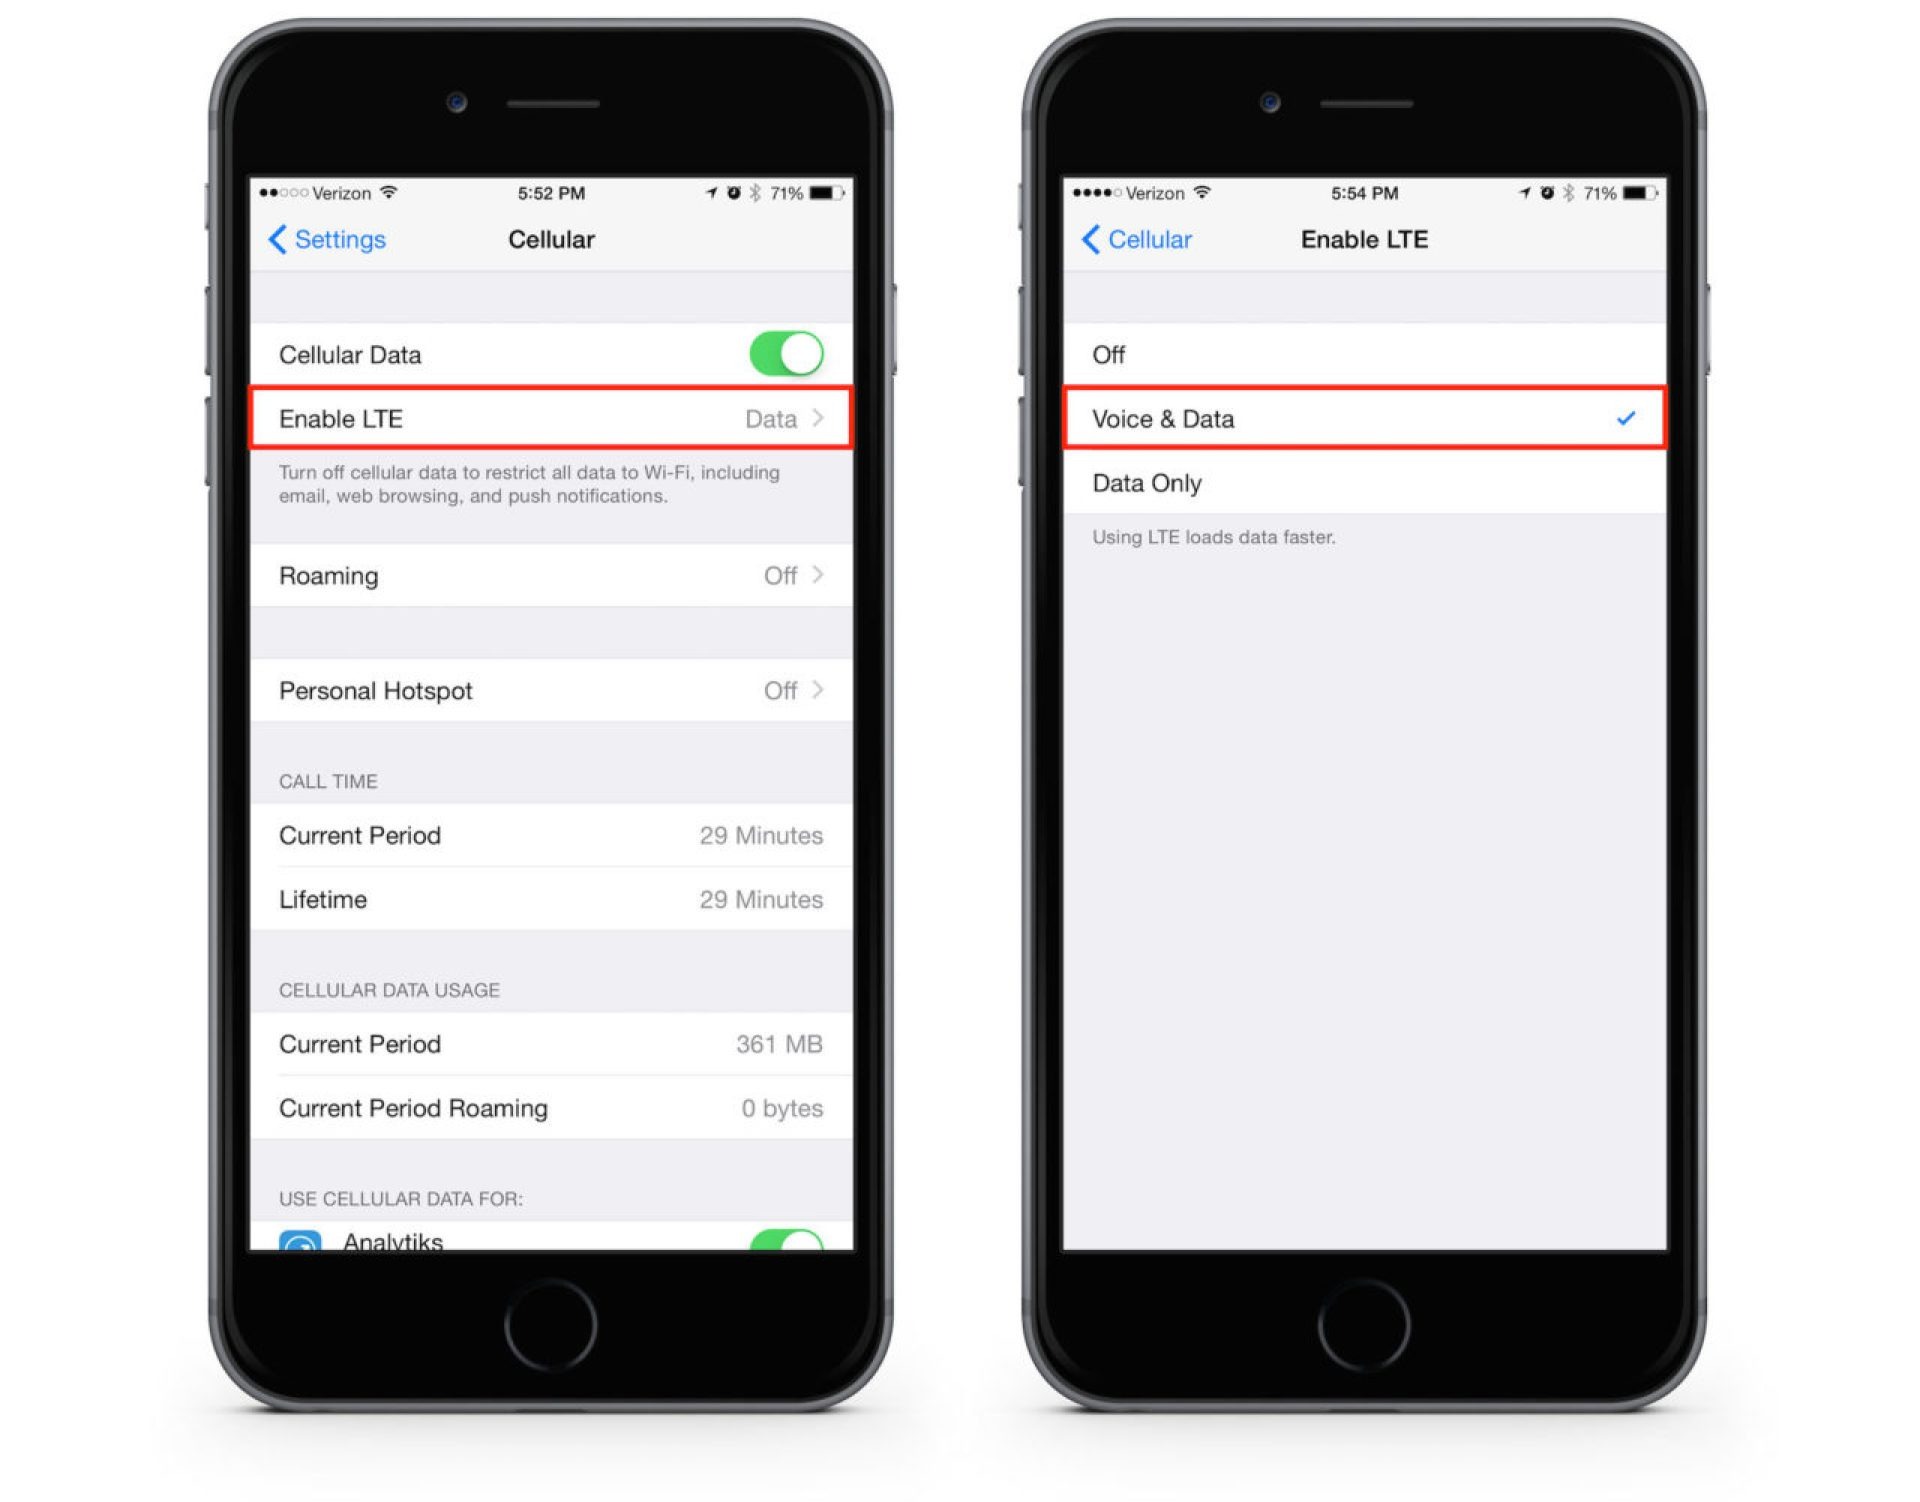 how-to-use-data-and-voice-hd-voice-on-a-verizon-iphone